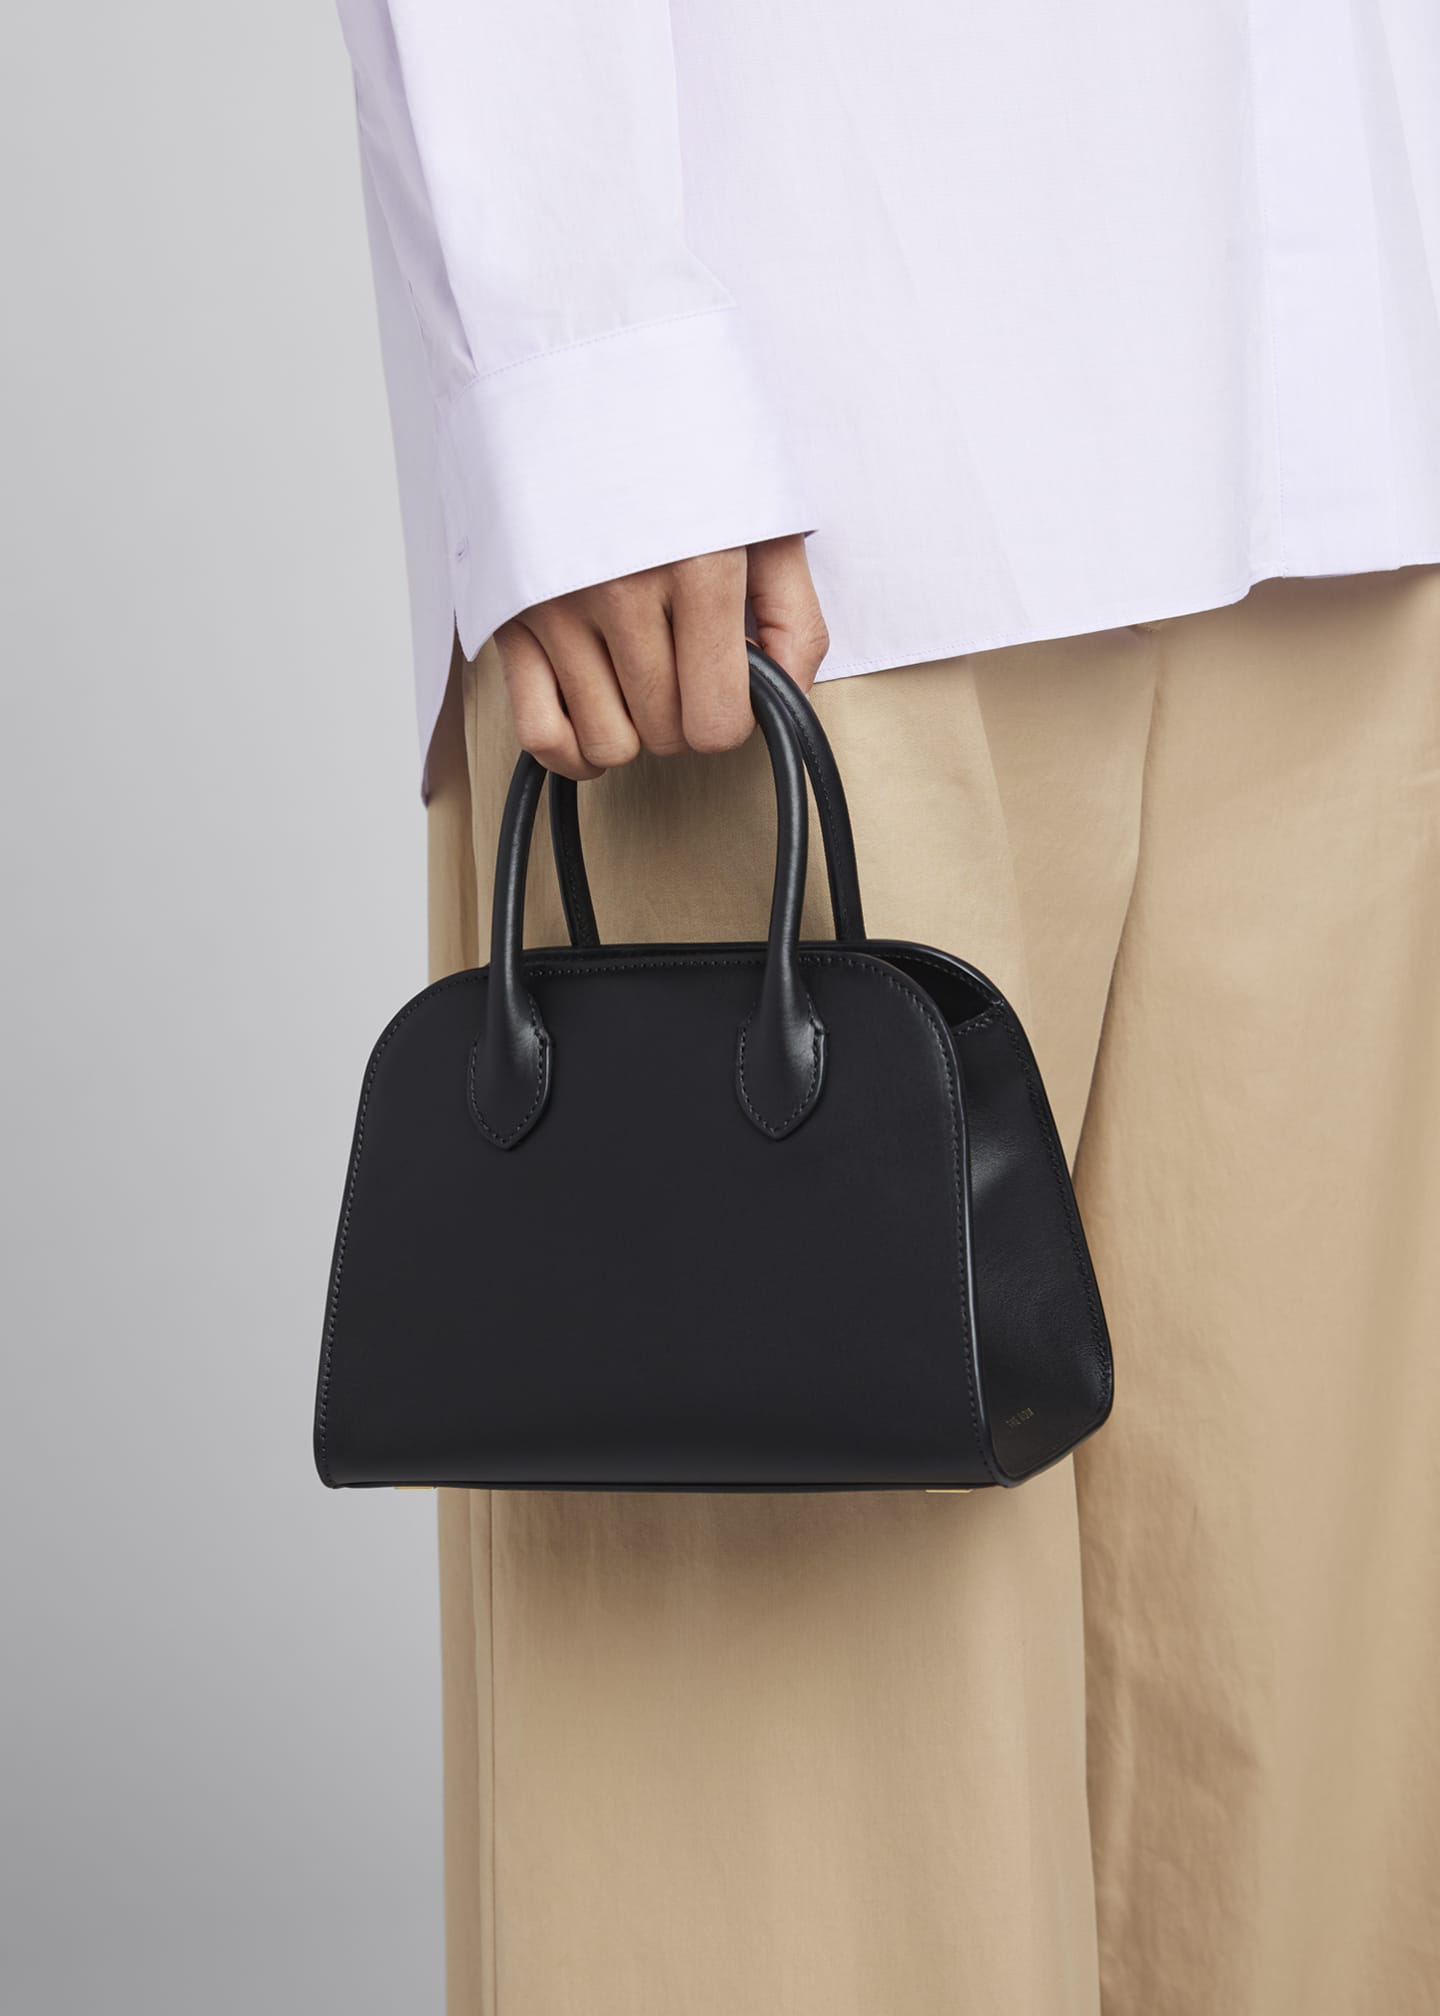 THE ROW Margaux 7.5 Top-Handle Bag in Calfskin Leather - Bergdorf Goodman